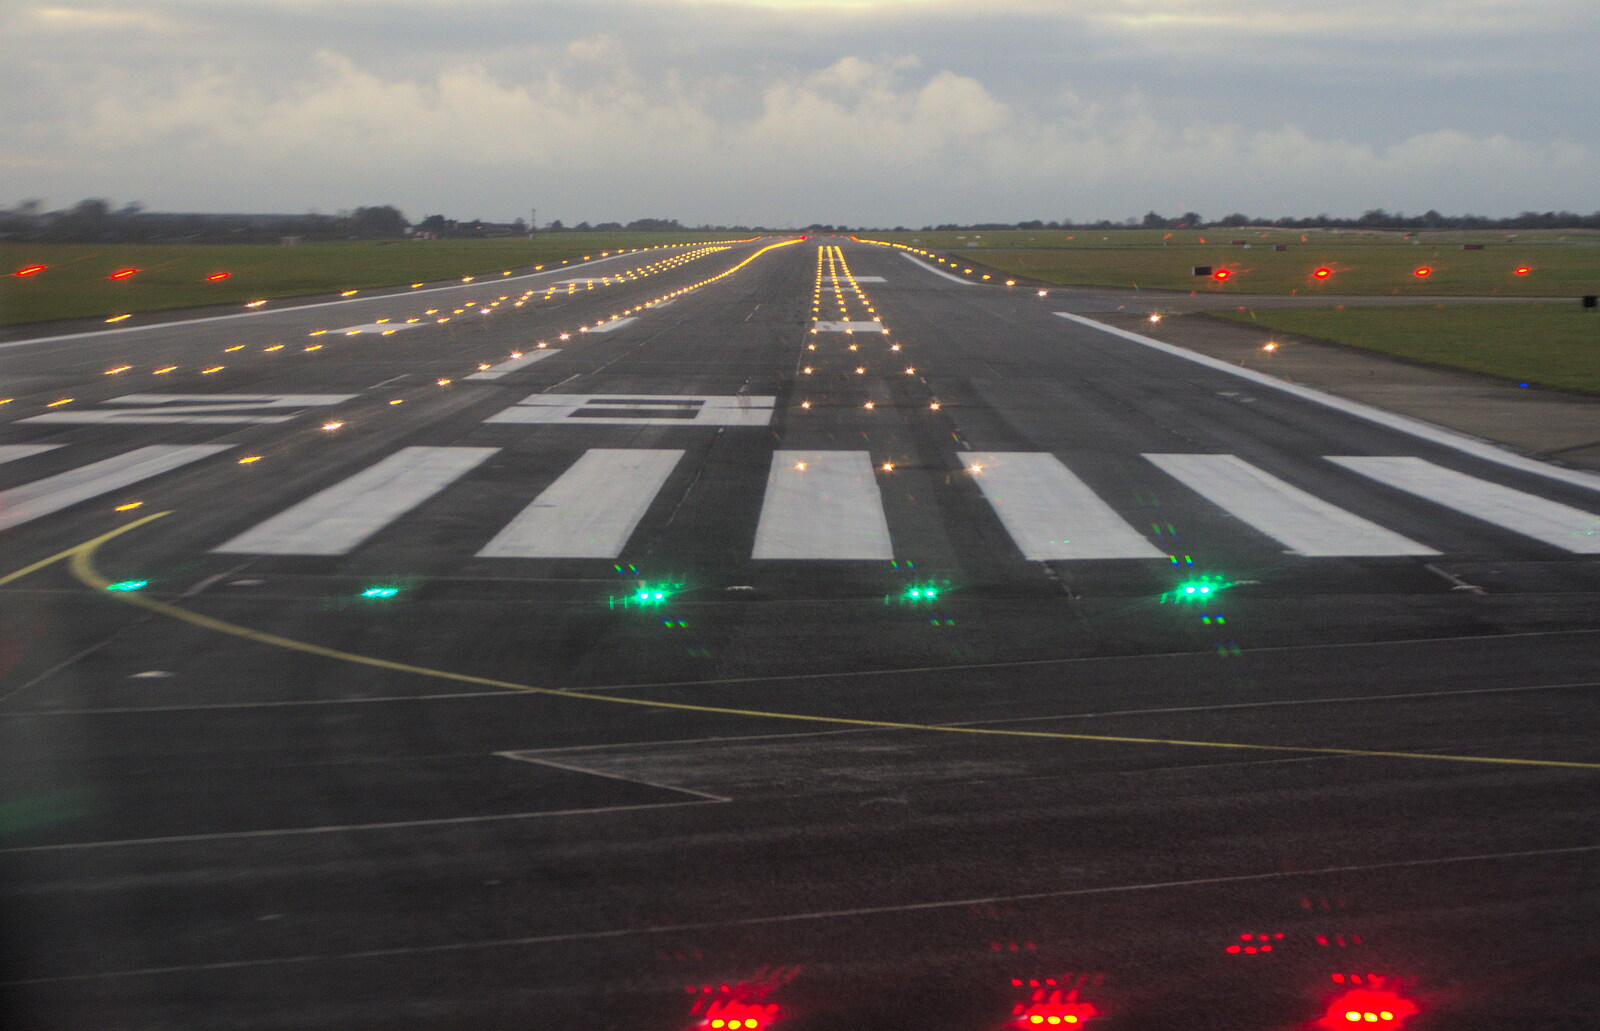 The bright lights of Runway 28 at Dublin Airport from A Morning in Blackrock, County Dublin, Ireland - 8th January 2012